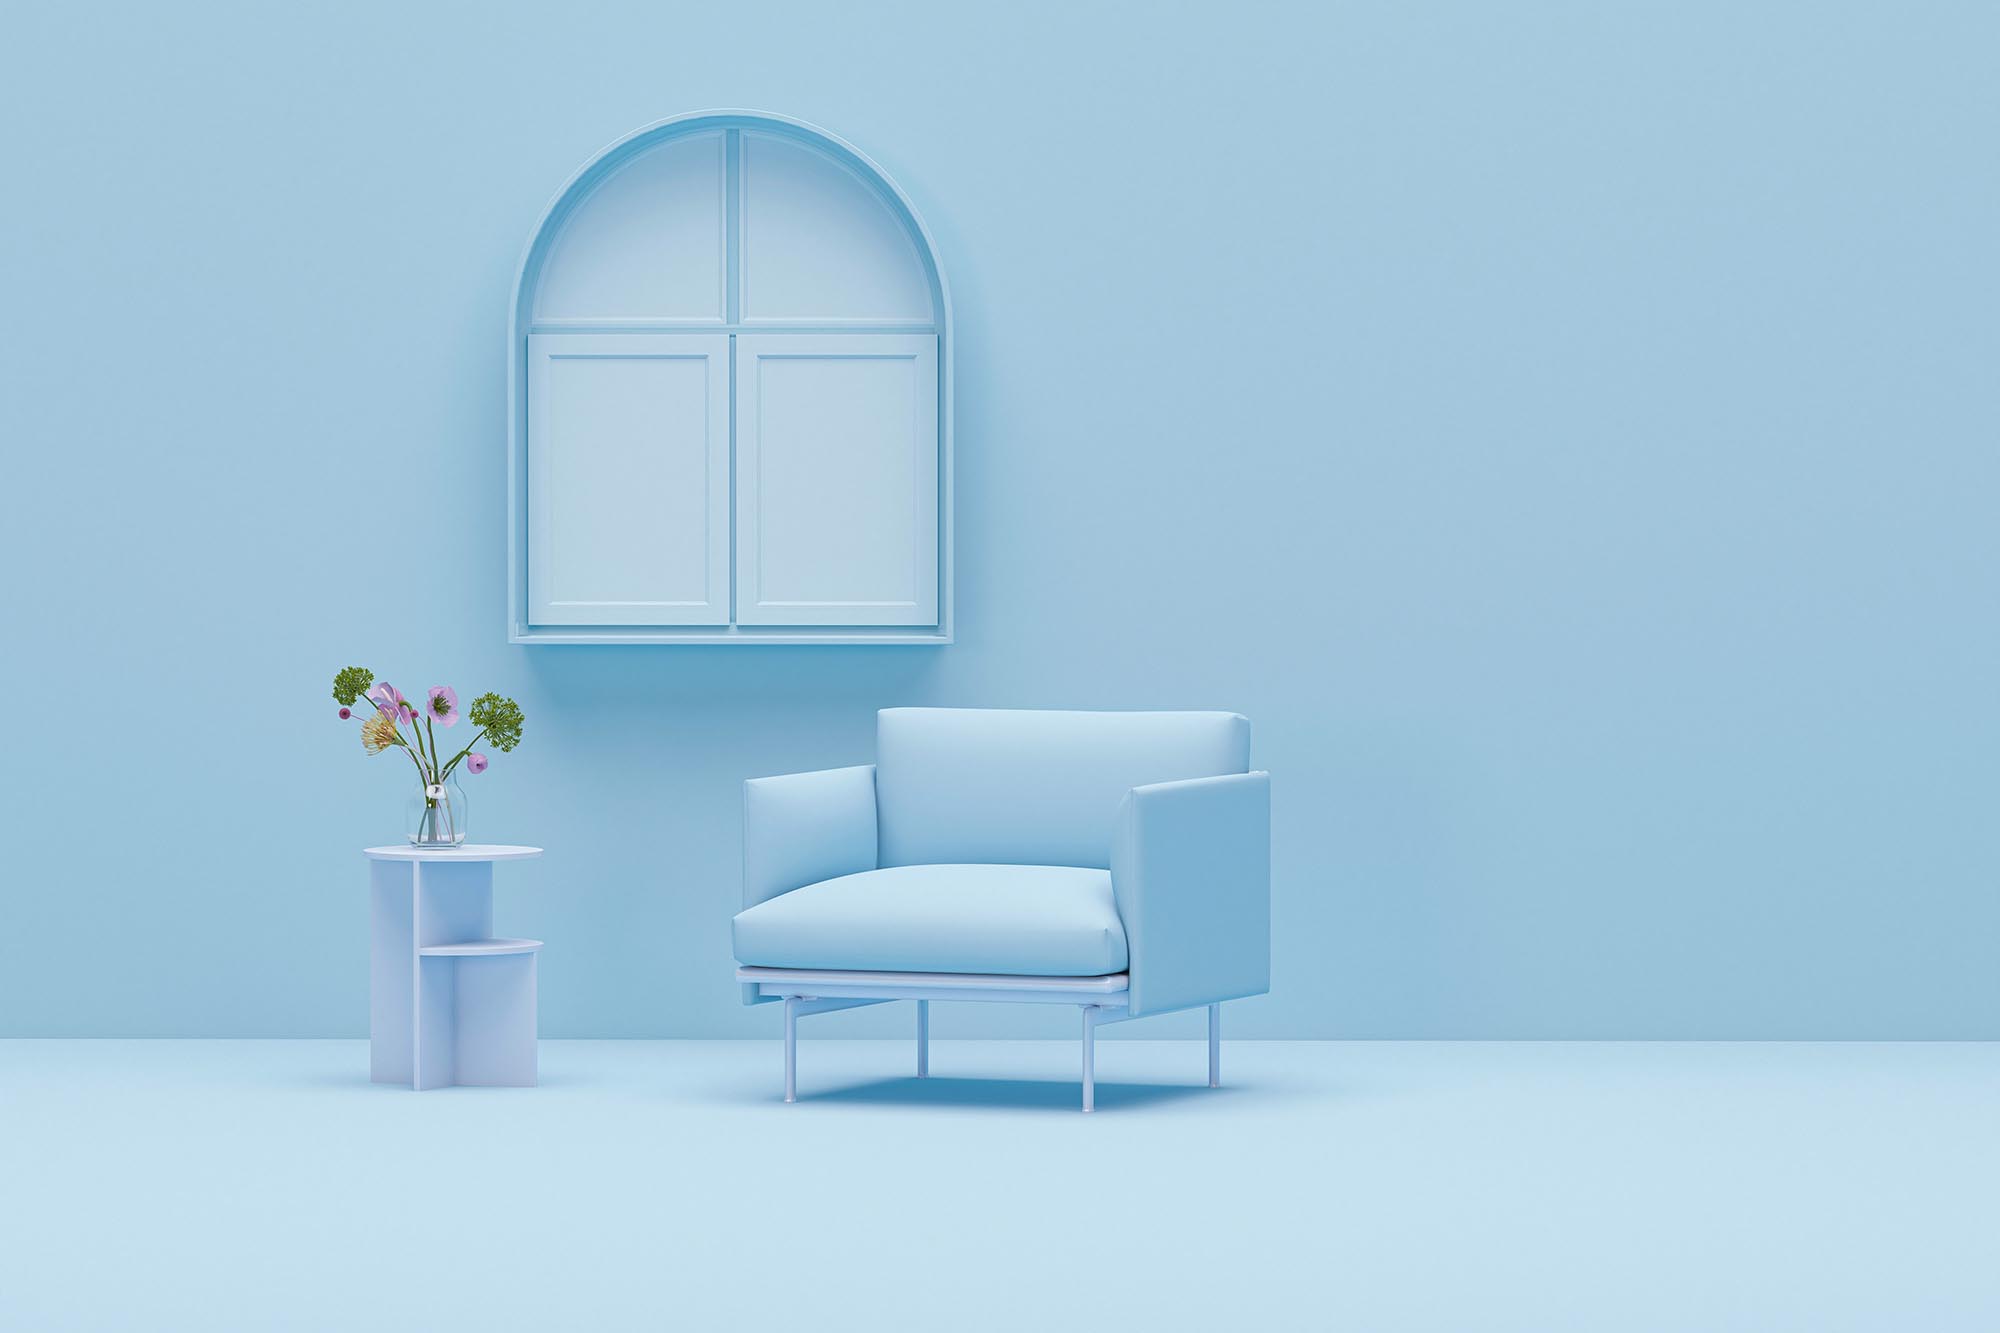 pastel blue studio with window, flower vase and armchair